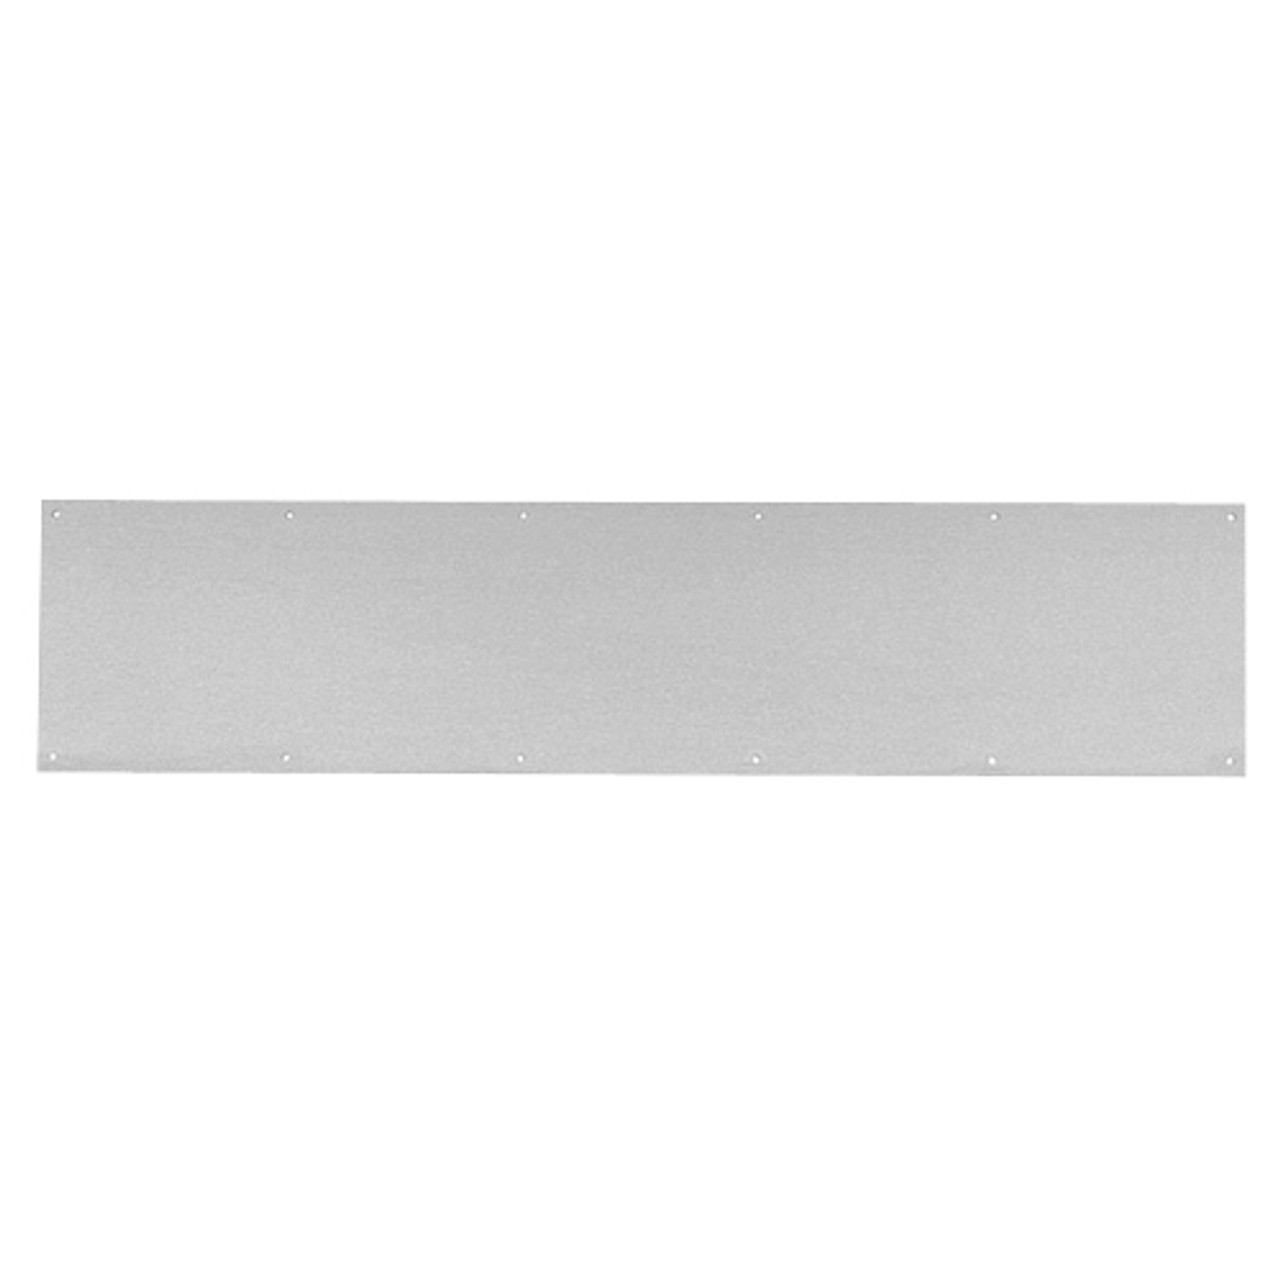 8400-US26D-12x10-B-CS Ives 8400 Series Protection Plate in Satin Chrome